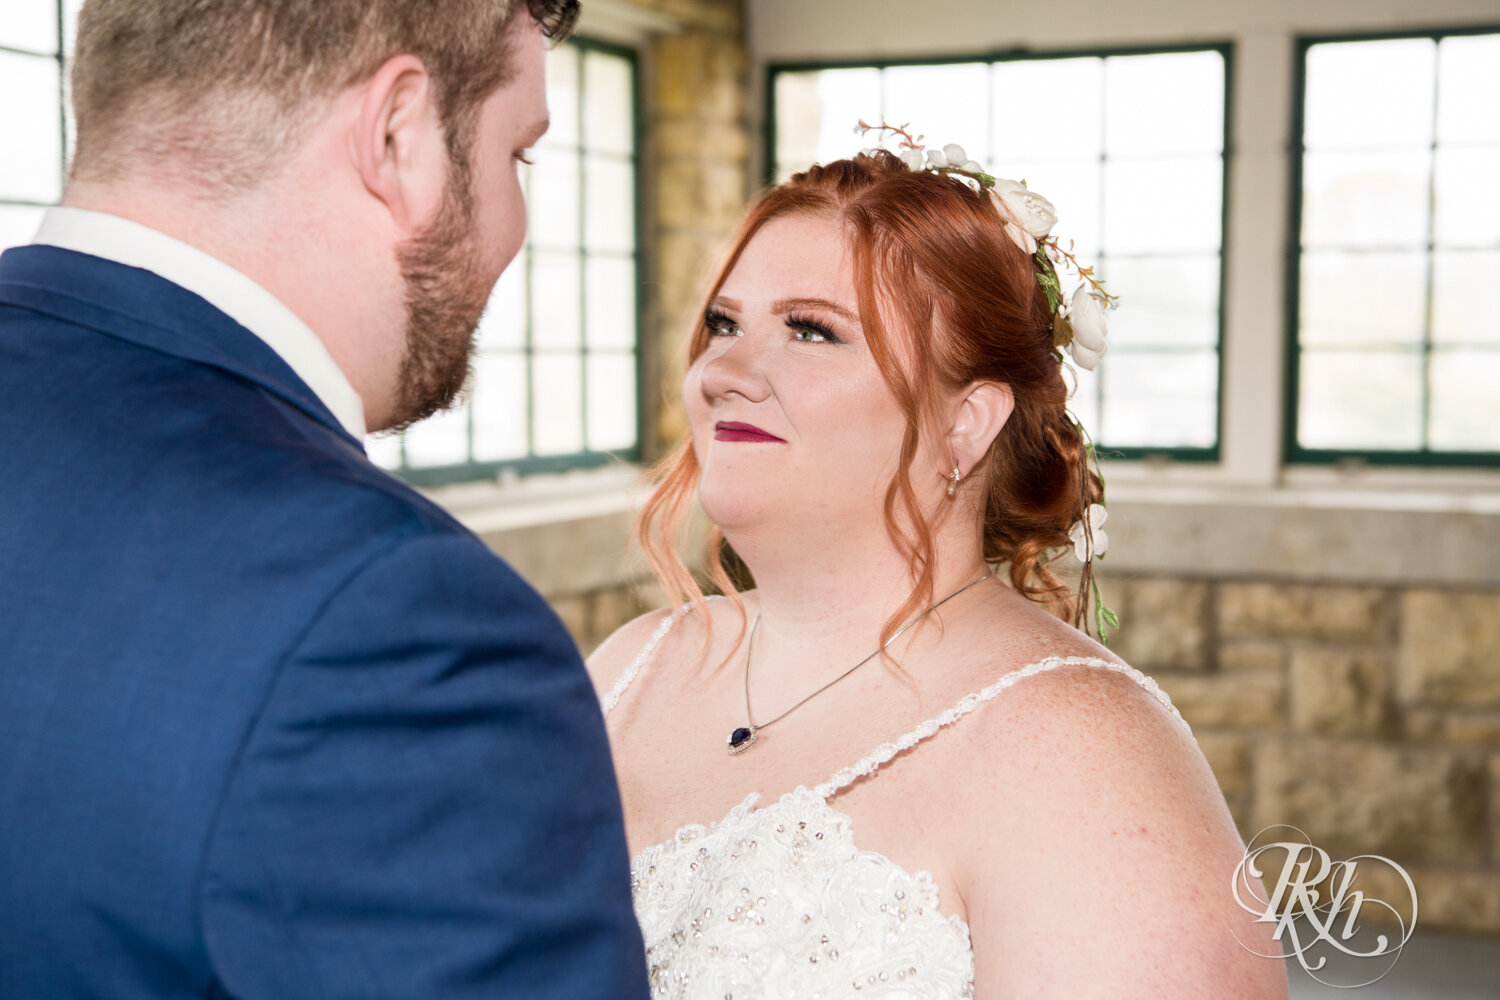 Plus size bride and groom share first look at wedding at Olmsted County Fairgrounds in Rochester, Minnesota.